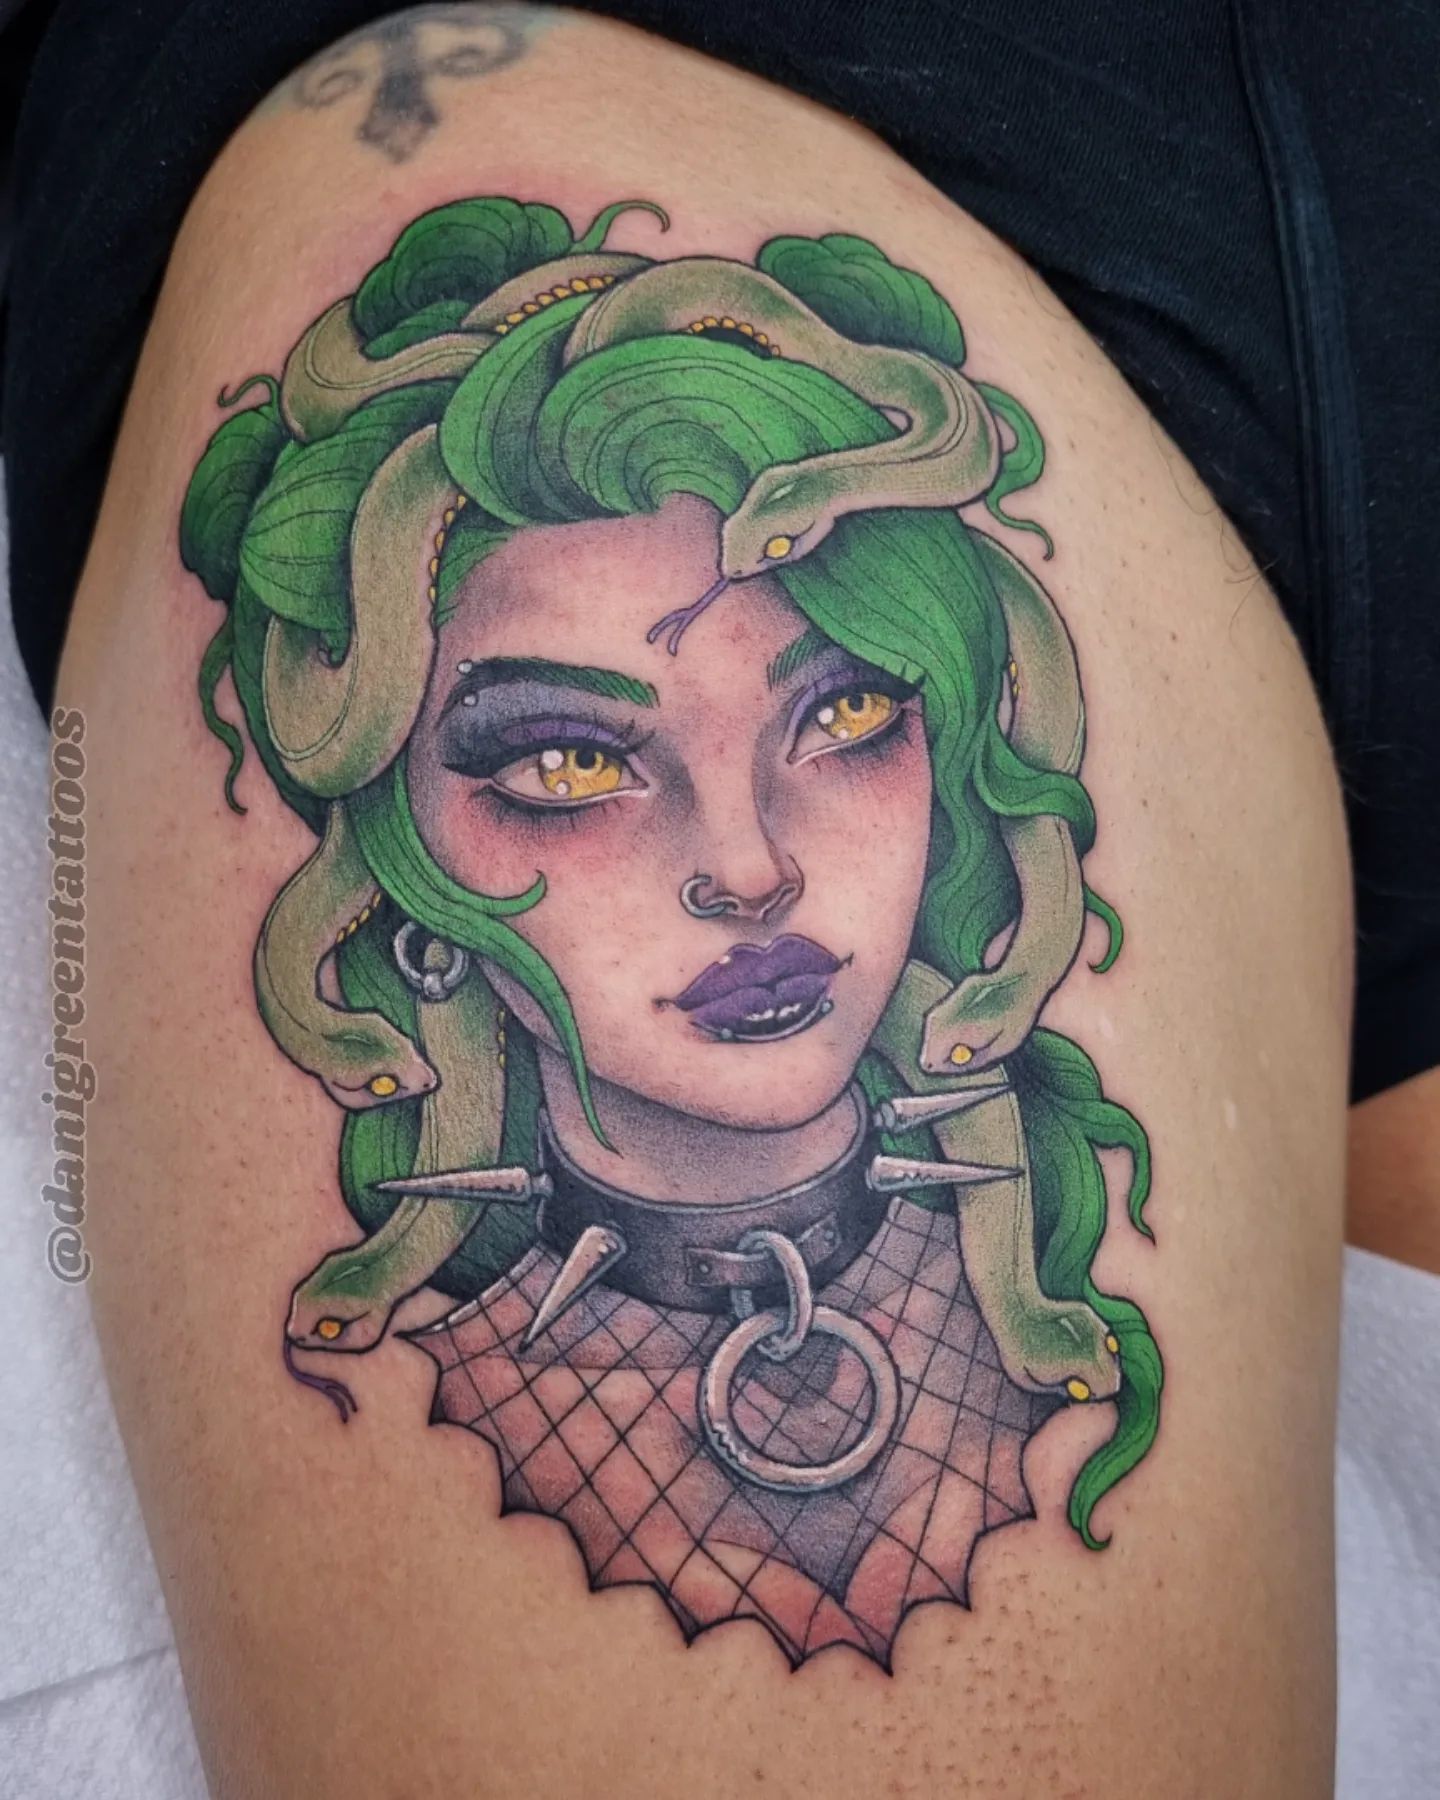 Have you ever seen such a punk Medusa like that? She is wearing a gothic necklace and her body is covered with nets, which is super cool. Plus, green hair and purple lips make a strong statement.